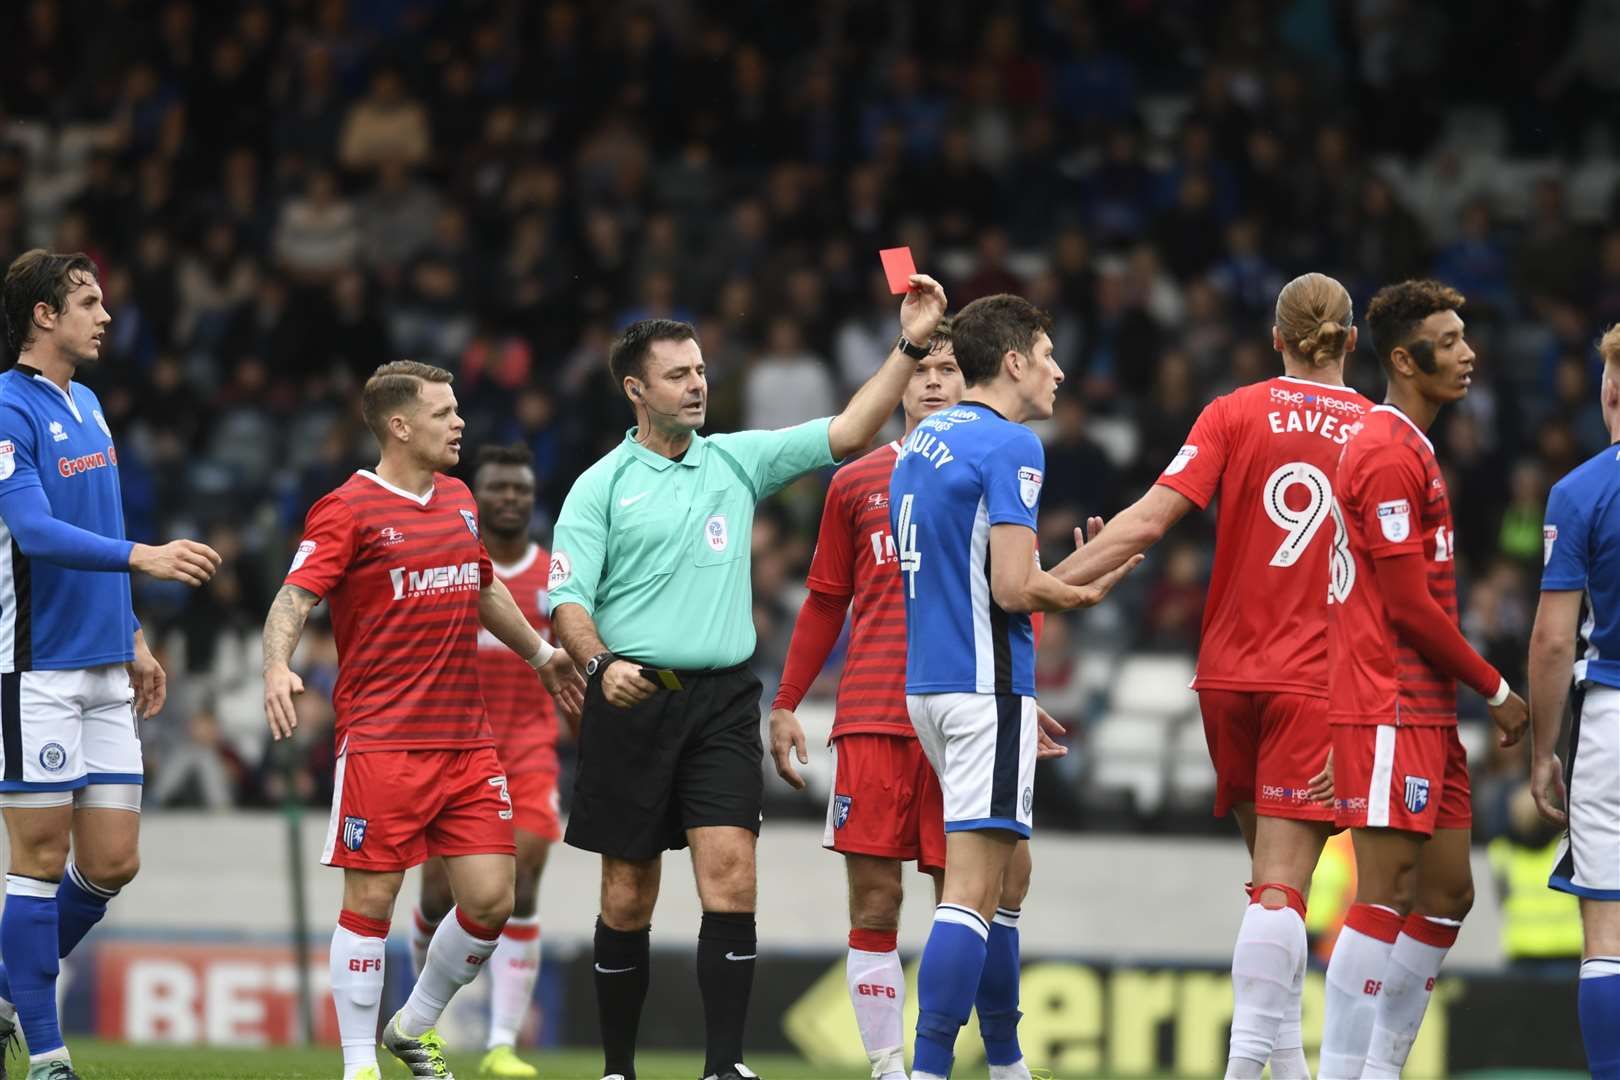 Tom Eaves was sent off in Gills' 3-0 defeat at Rochdale last season, the last one in charge for former boss Ady Pennock Picture: Barry Goodwin